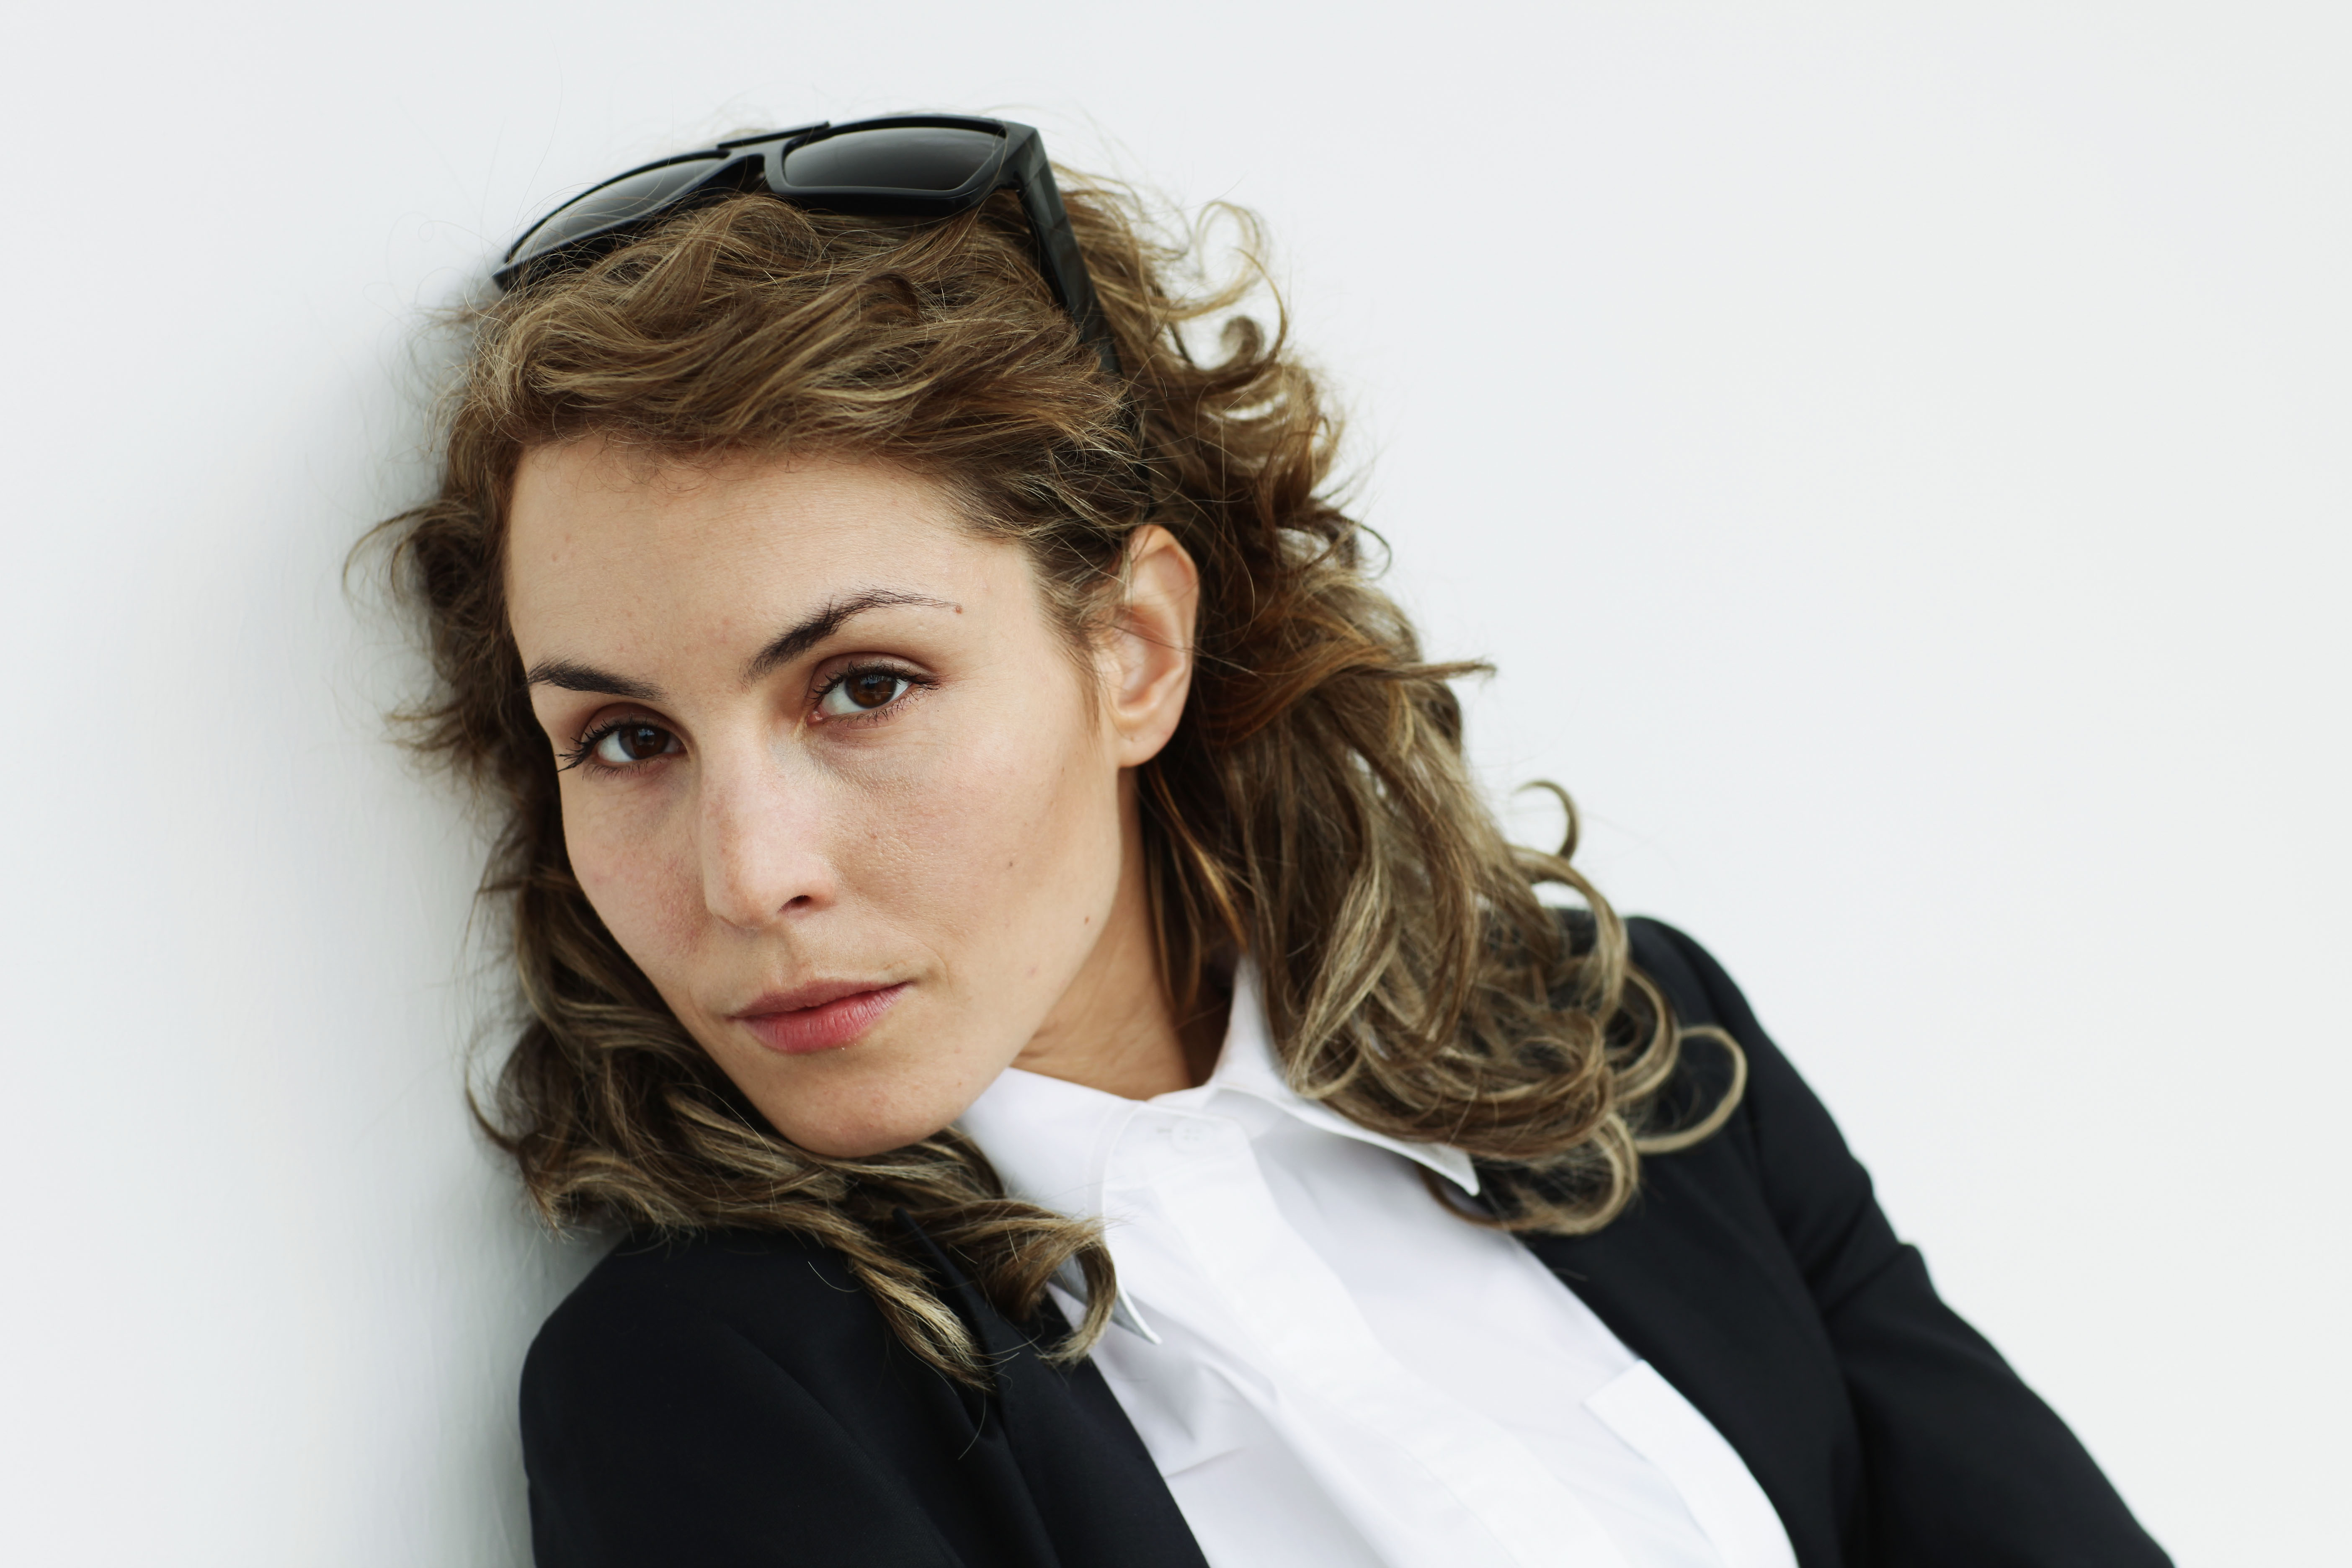 Noomi Rapace #5